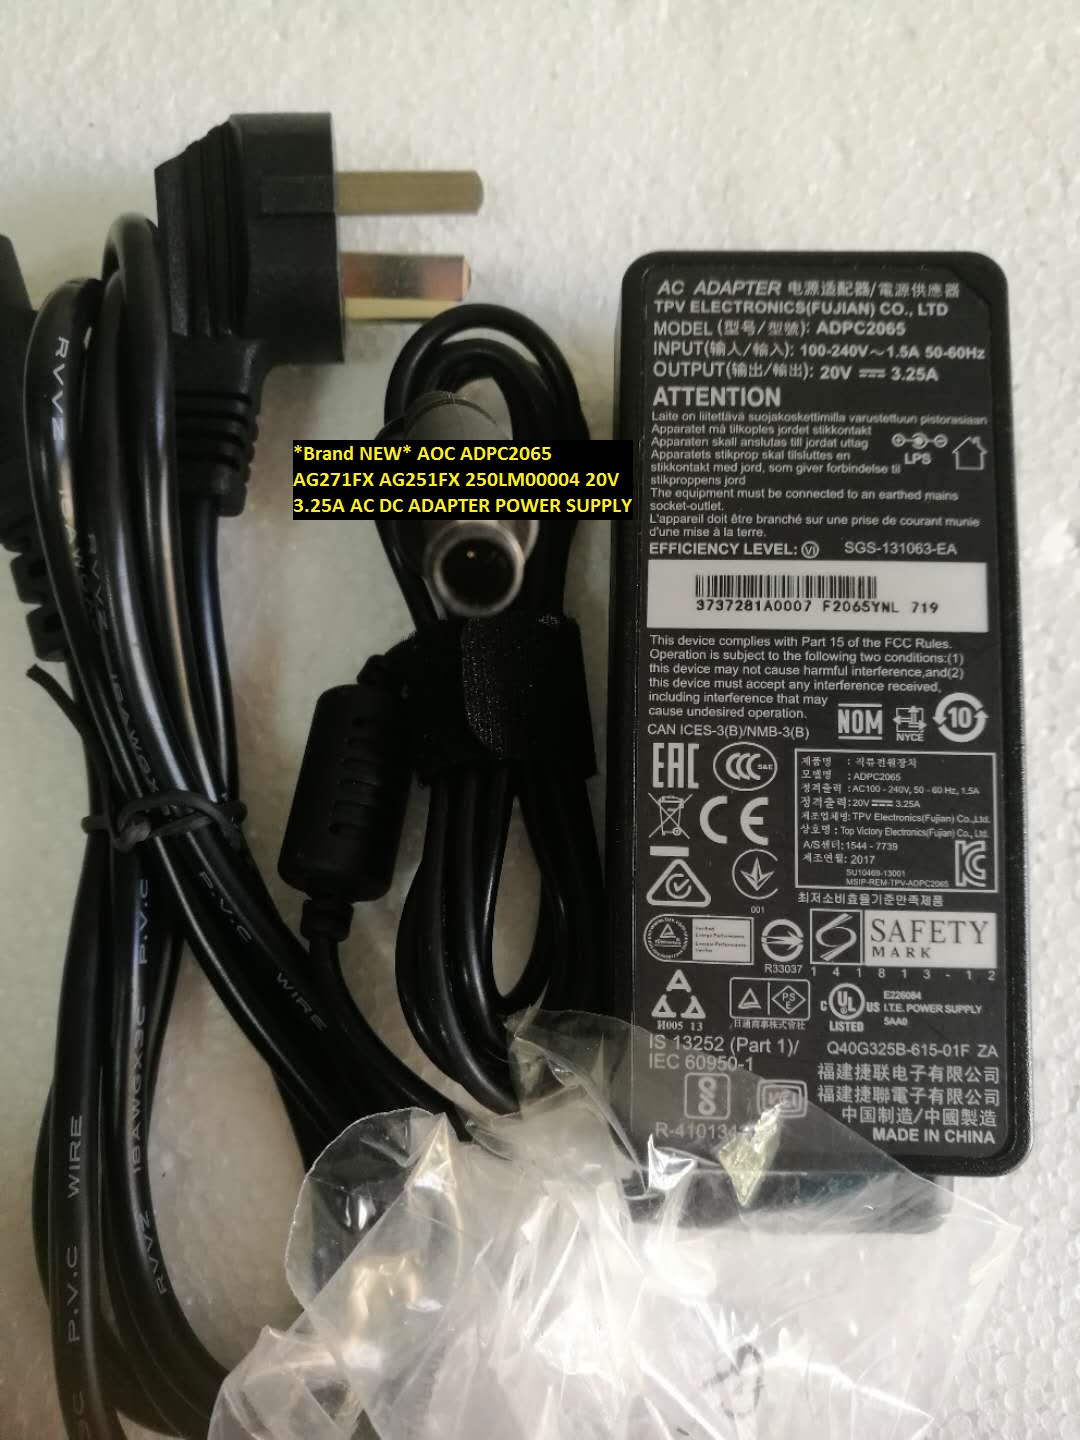 *Brand NEW*20V 3.25A AC DC ADAPTER AOC 250LM00004 AG271FX AG251FX ADPC2065 POWER SUPPLY - Click Image to Close